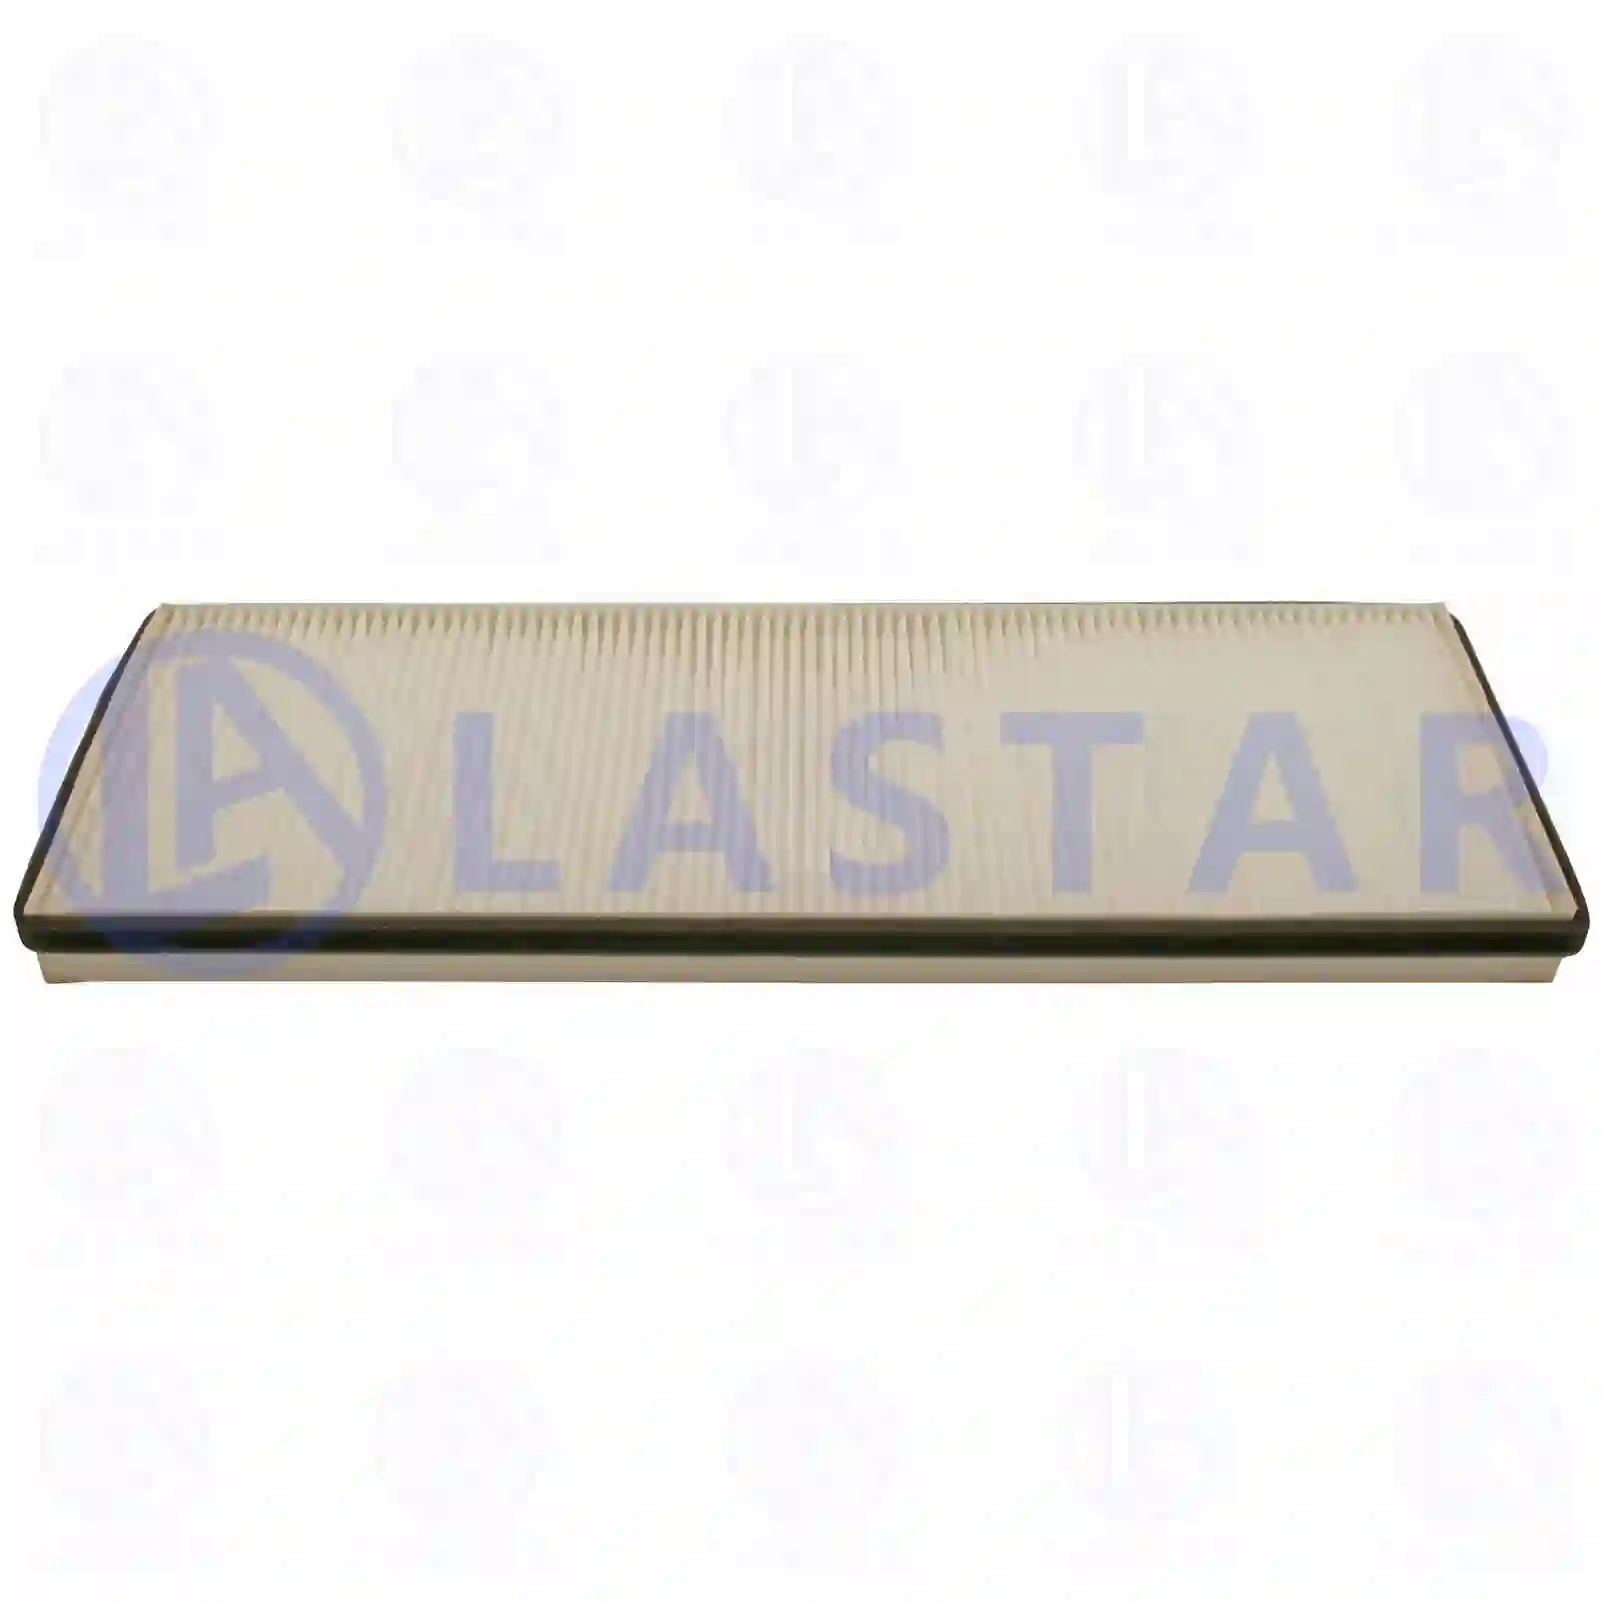  Cabin air filter || Lastar Spare Part | Truck Spare Parts, Auotomotive Spare Parts